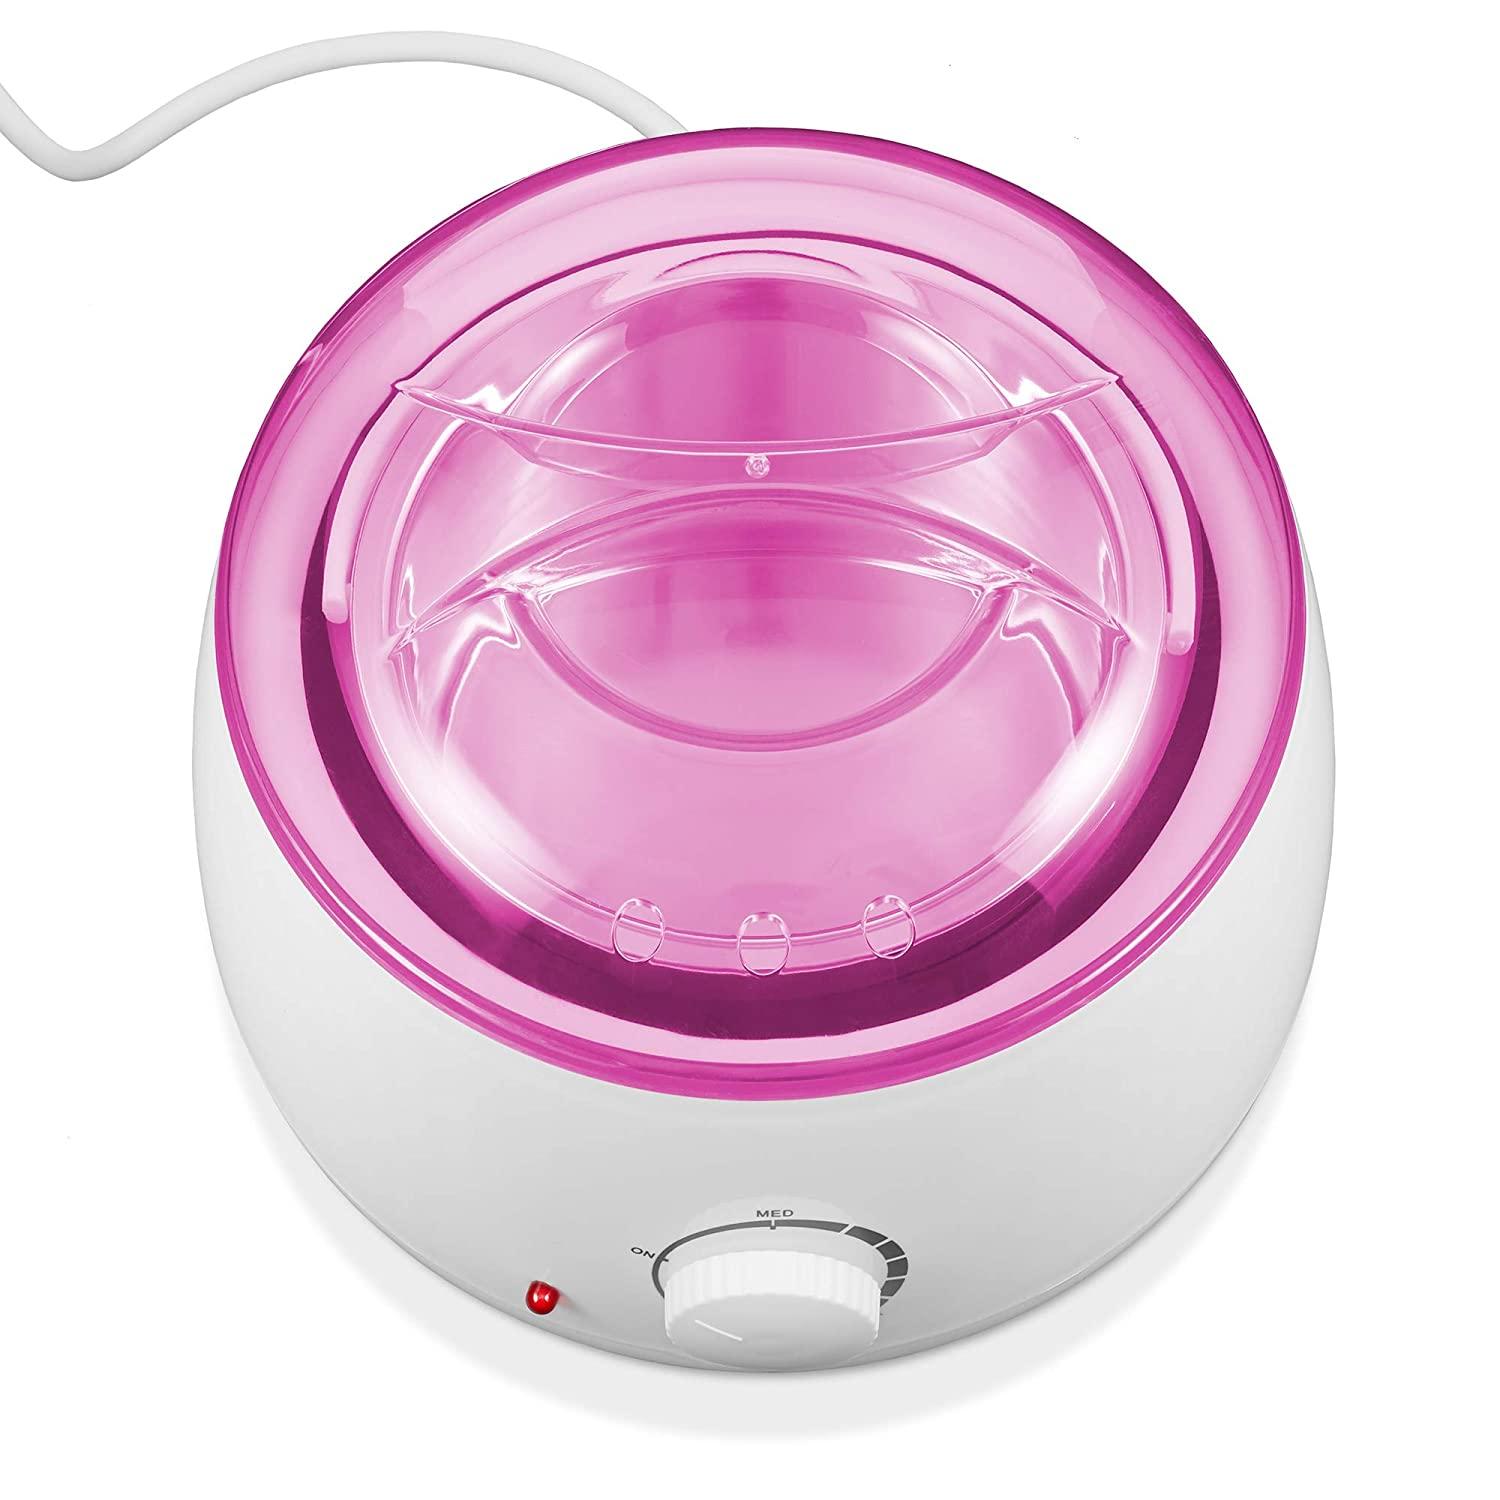 Electric Wax Warmer for Hair Removal - Black and Pink by Salon